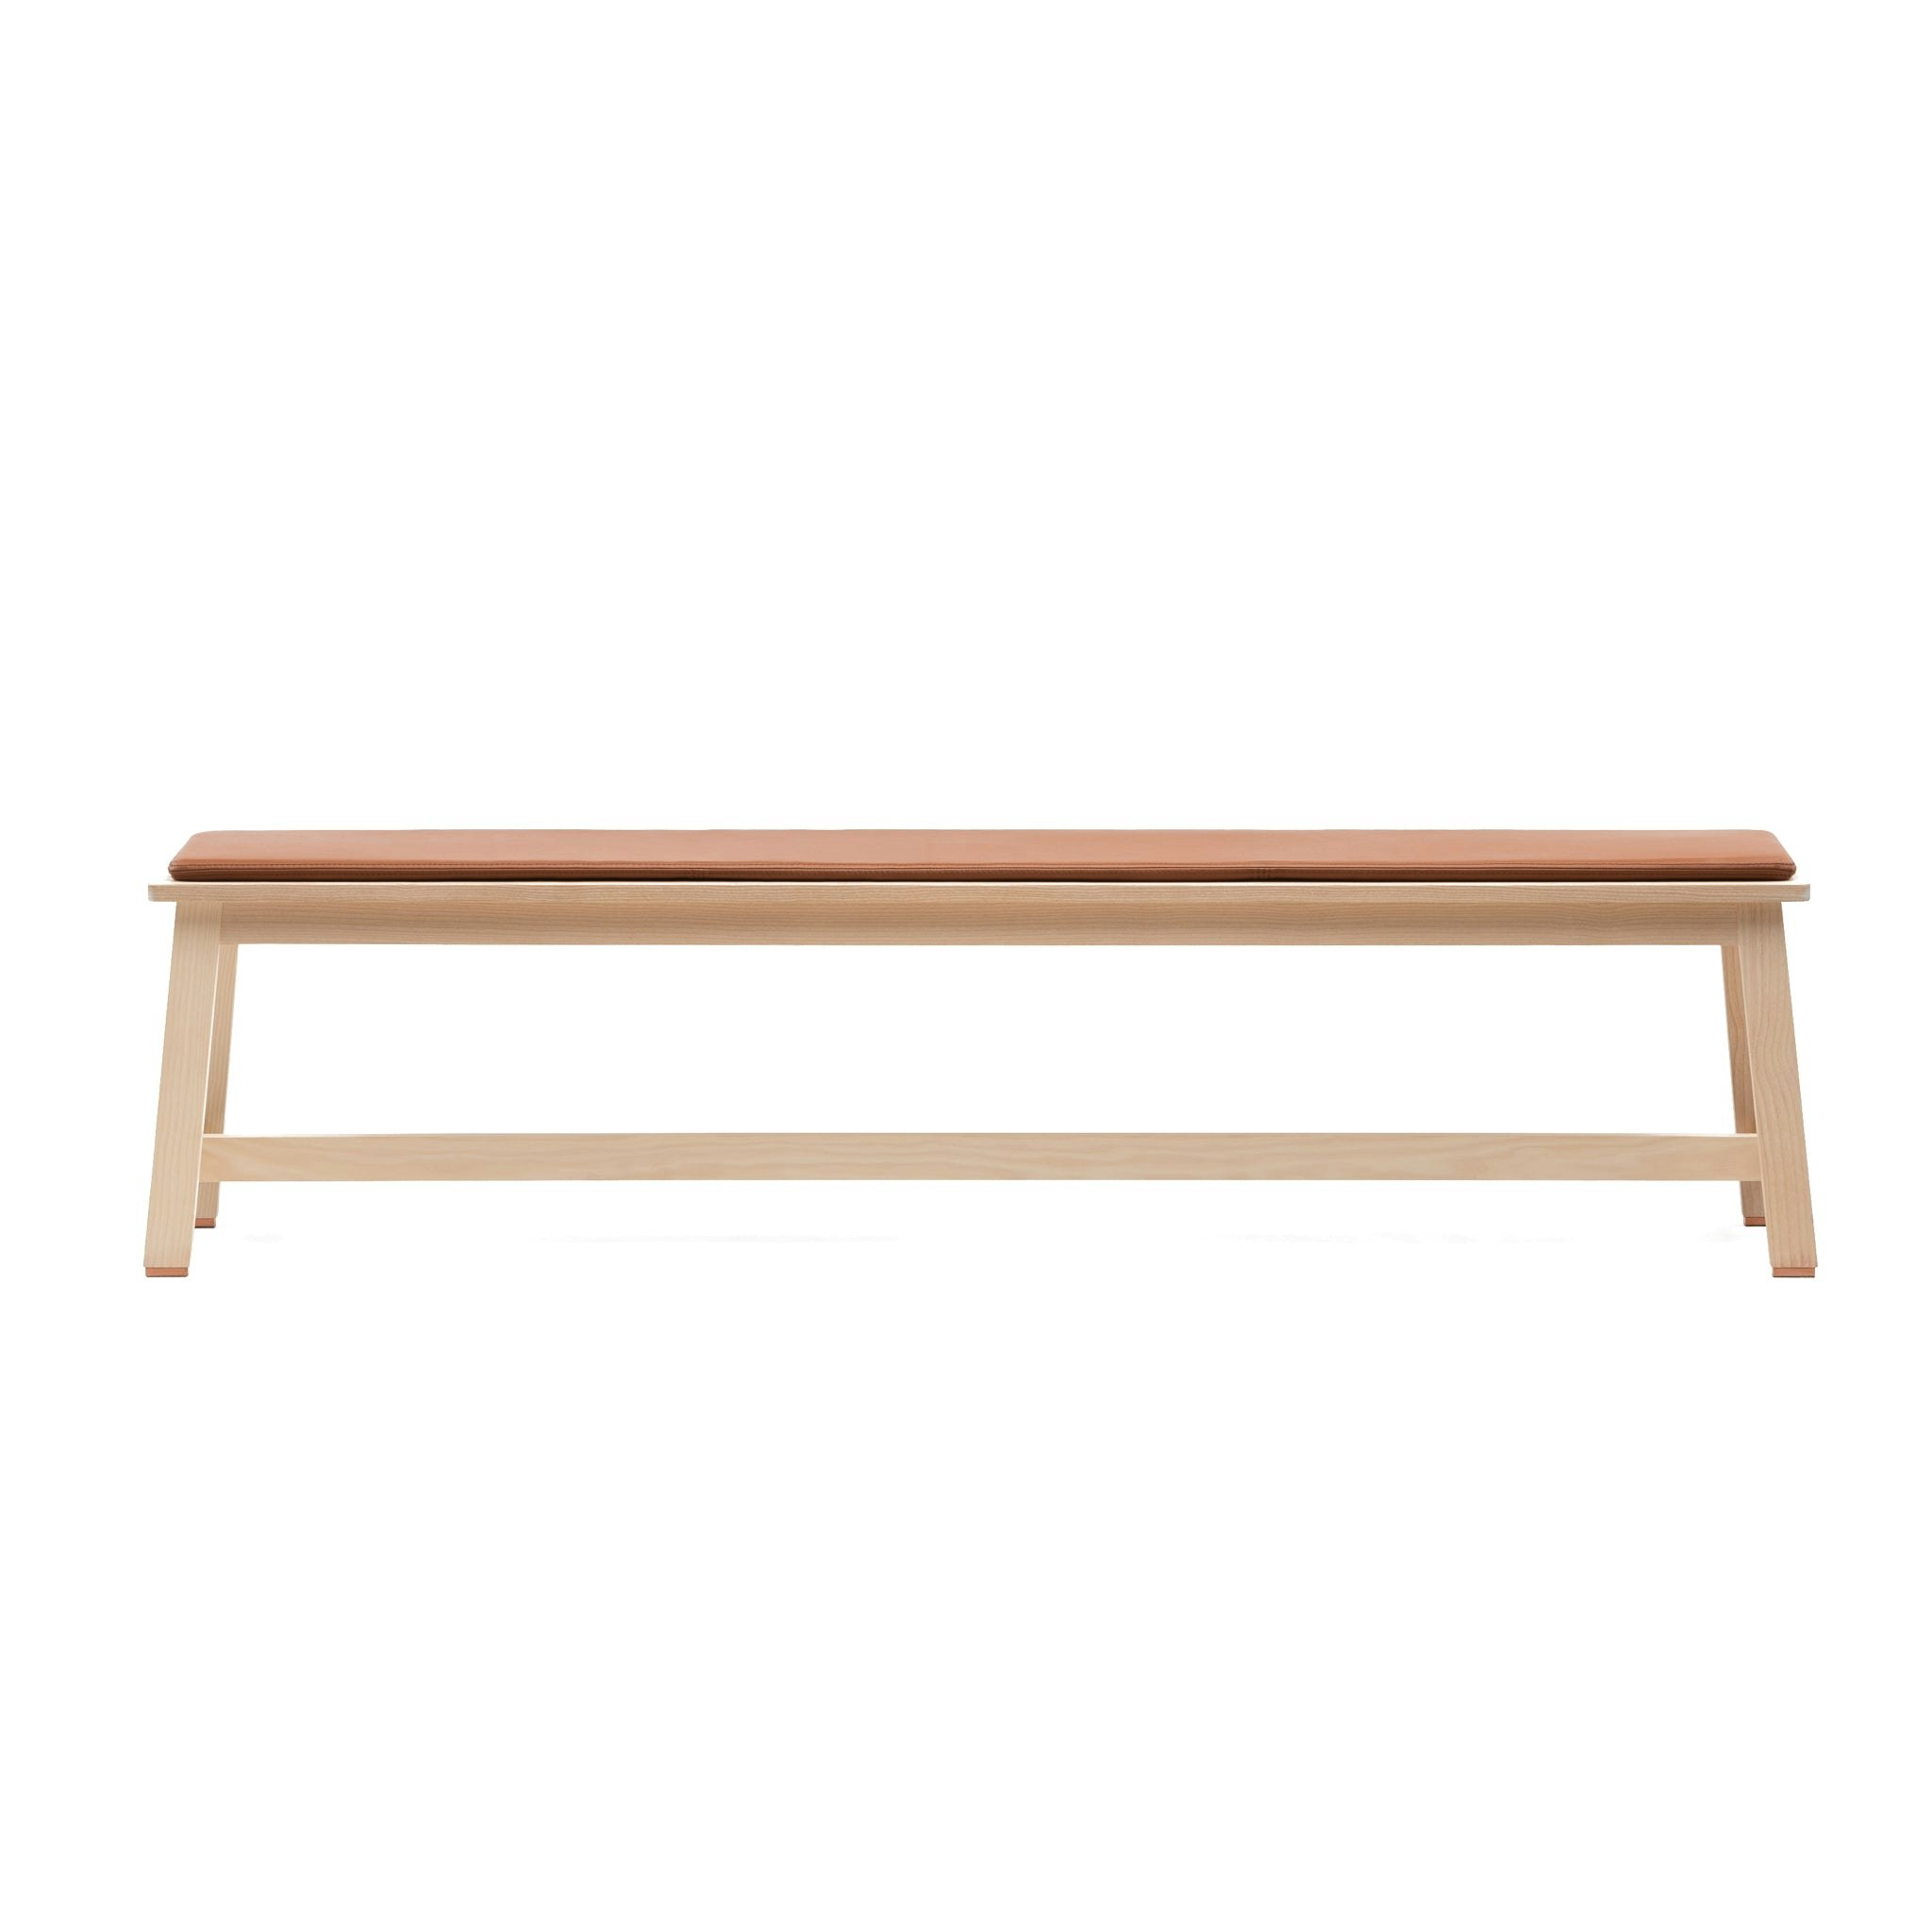 443 Bench by Ilse Crawford